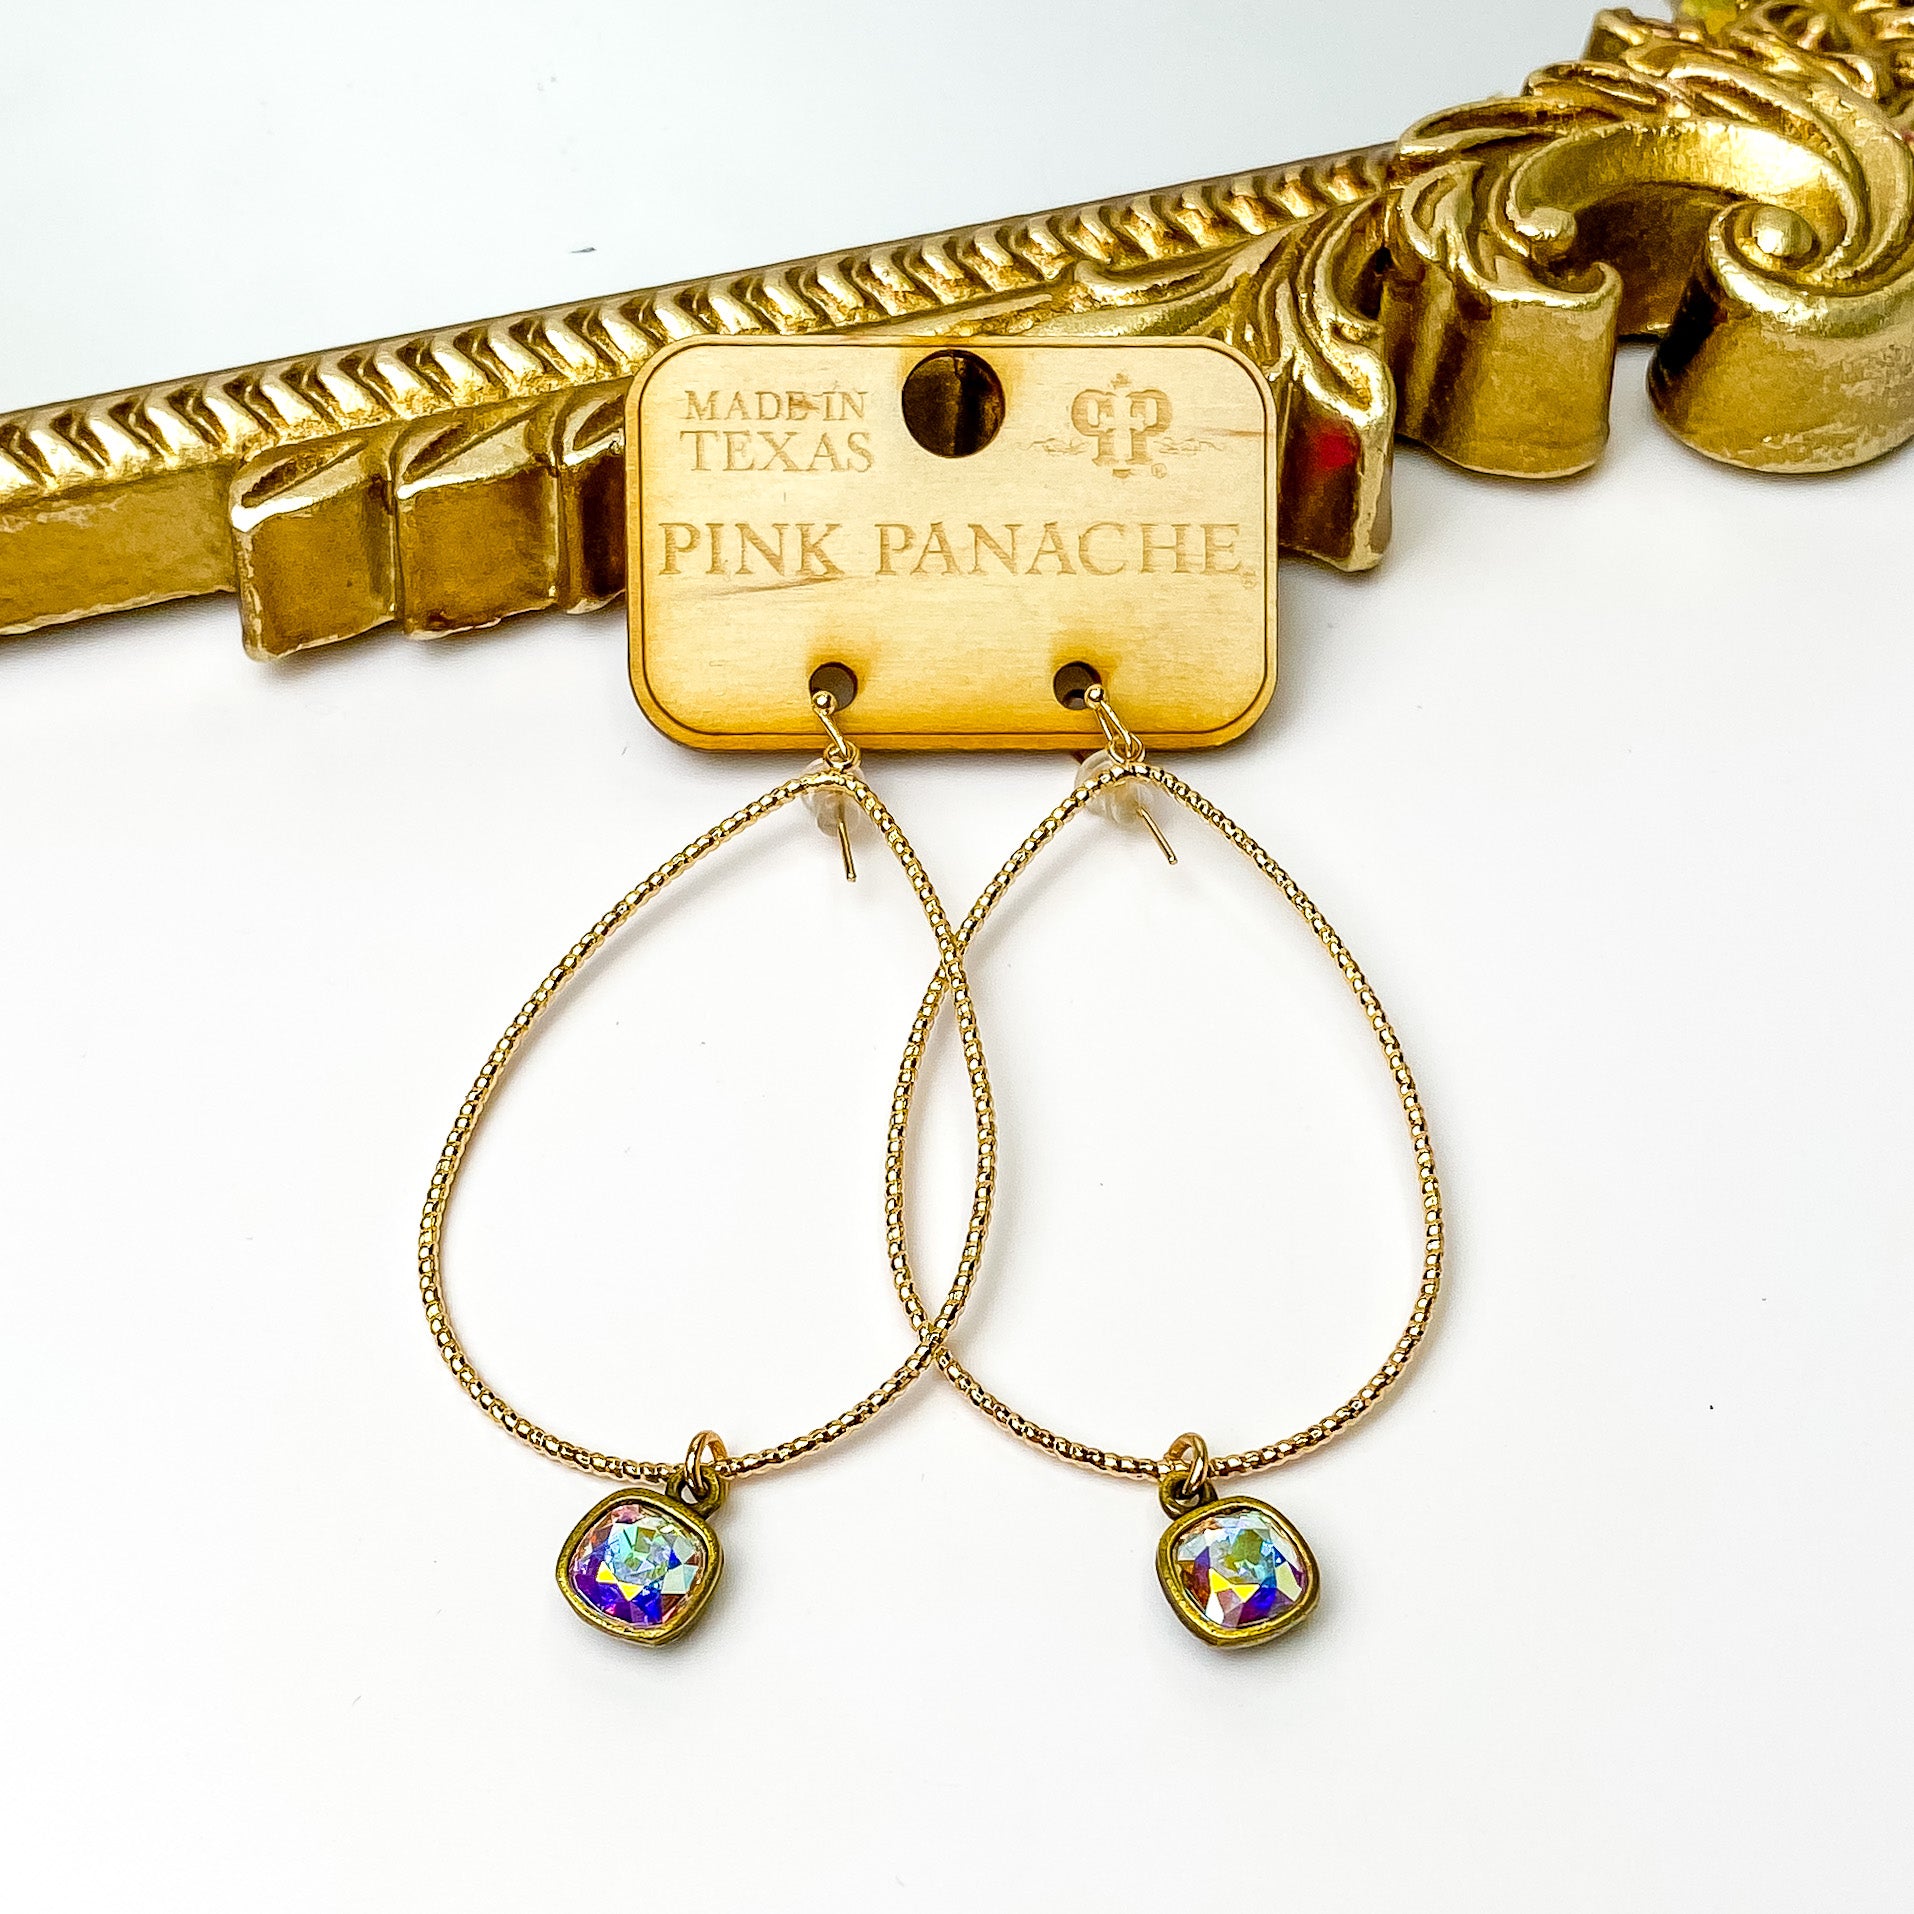 Gold teardrop earrings with hanging ab cushion cut crystal charm. These earrings are pictured on a wood earrings holder in front of a gold mirror on a white background. 